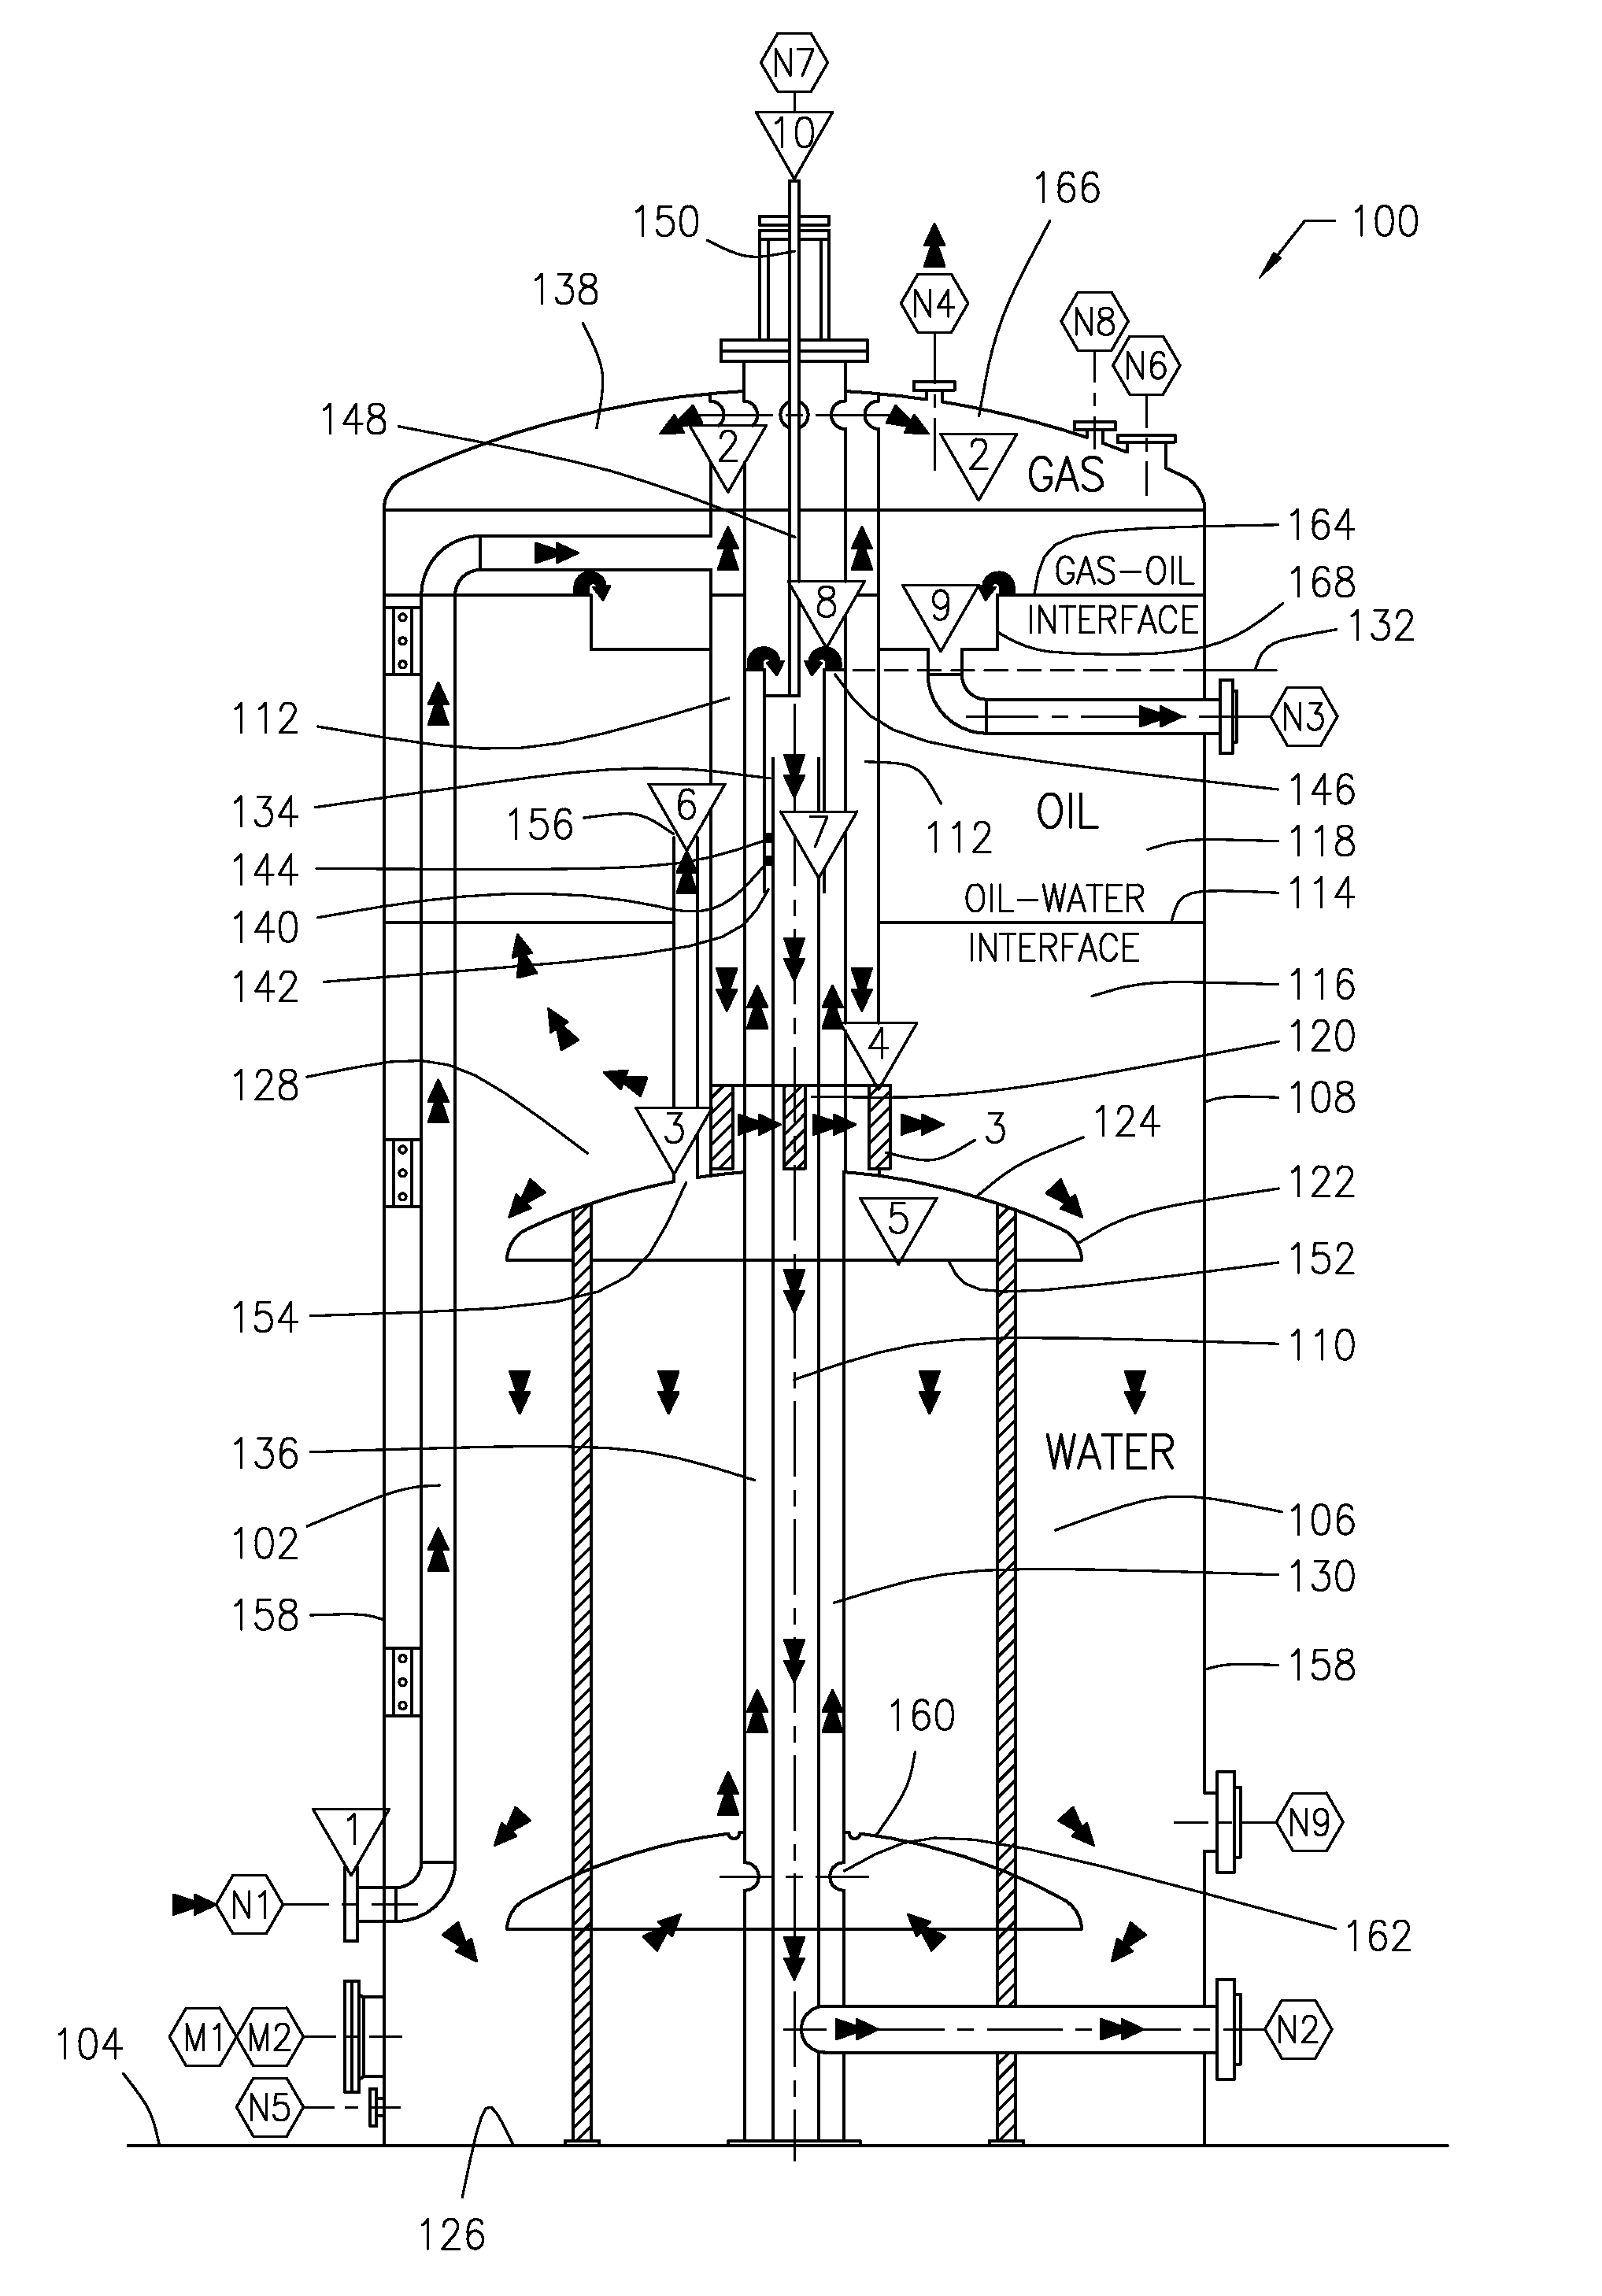 Apparatus for separating oil well products